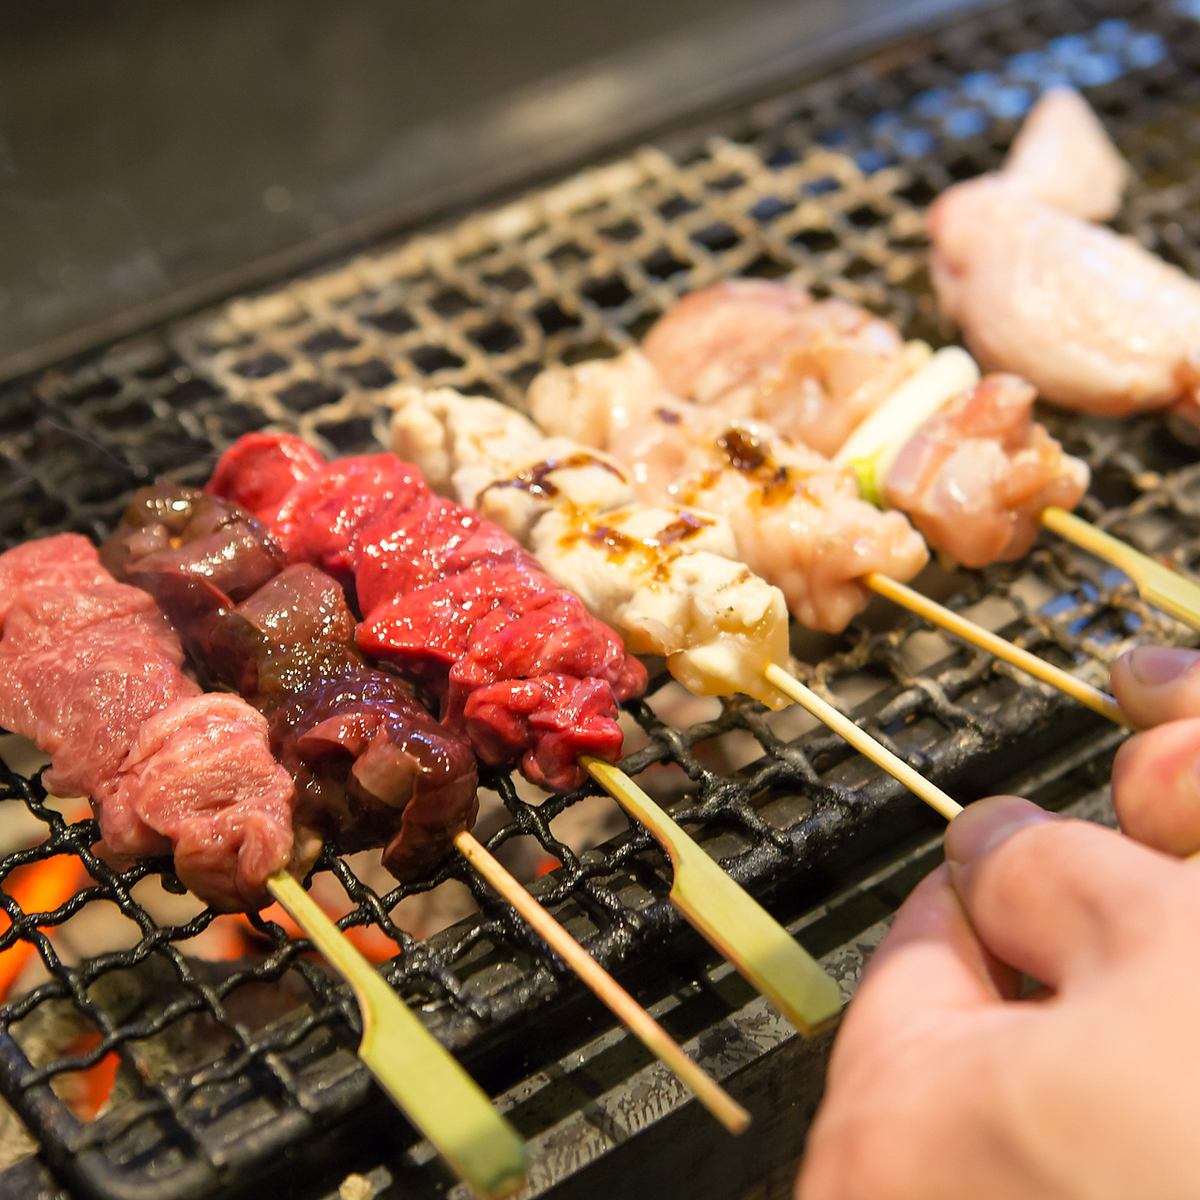 Charcoal-grilled and juicy ♪ The special yakitori made with Tamba chicken is exquisite ☆